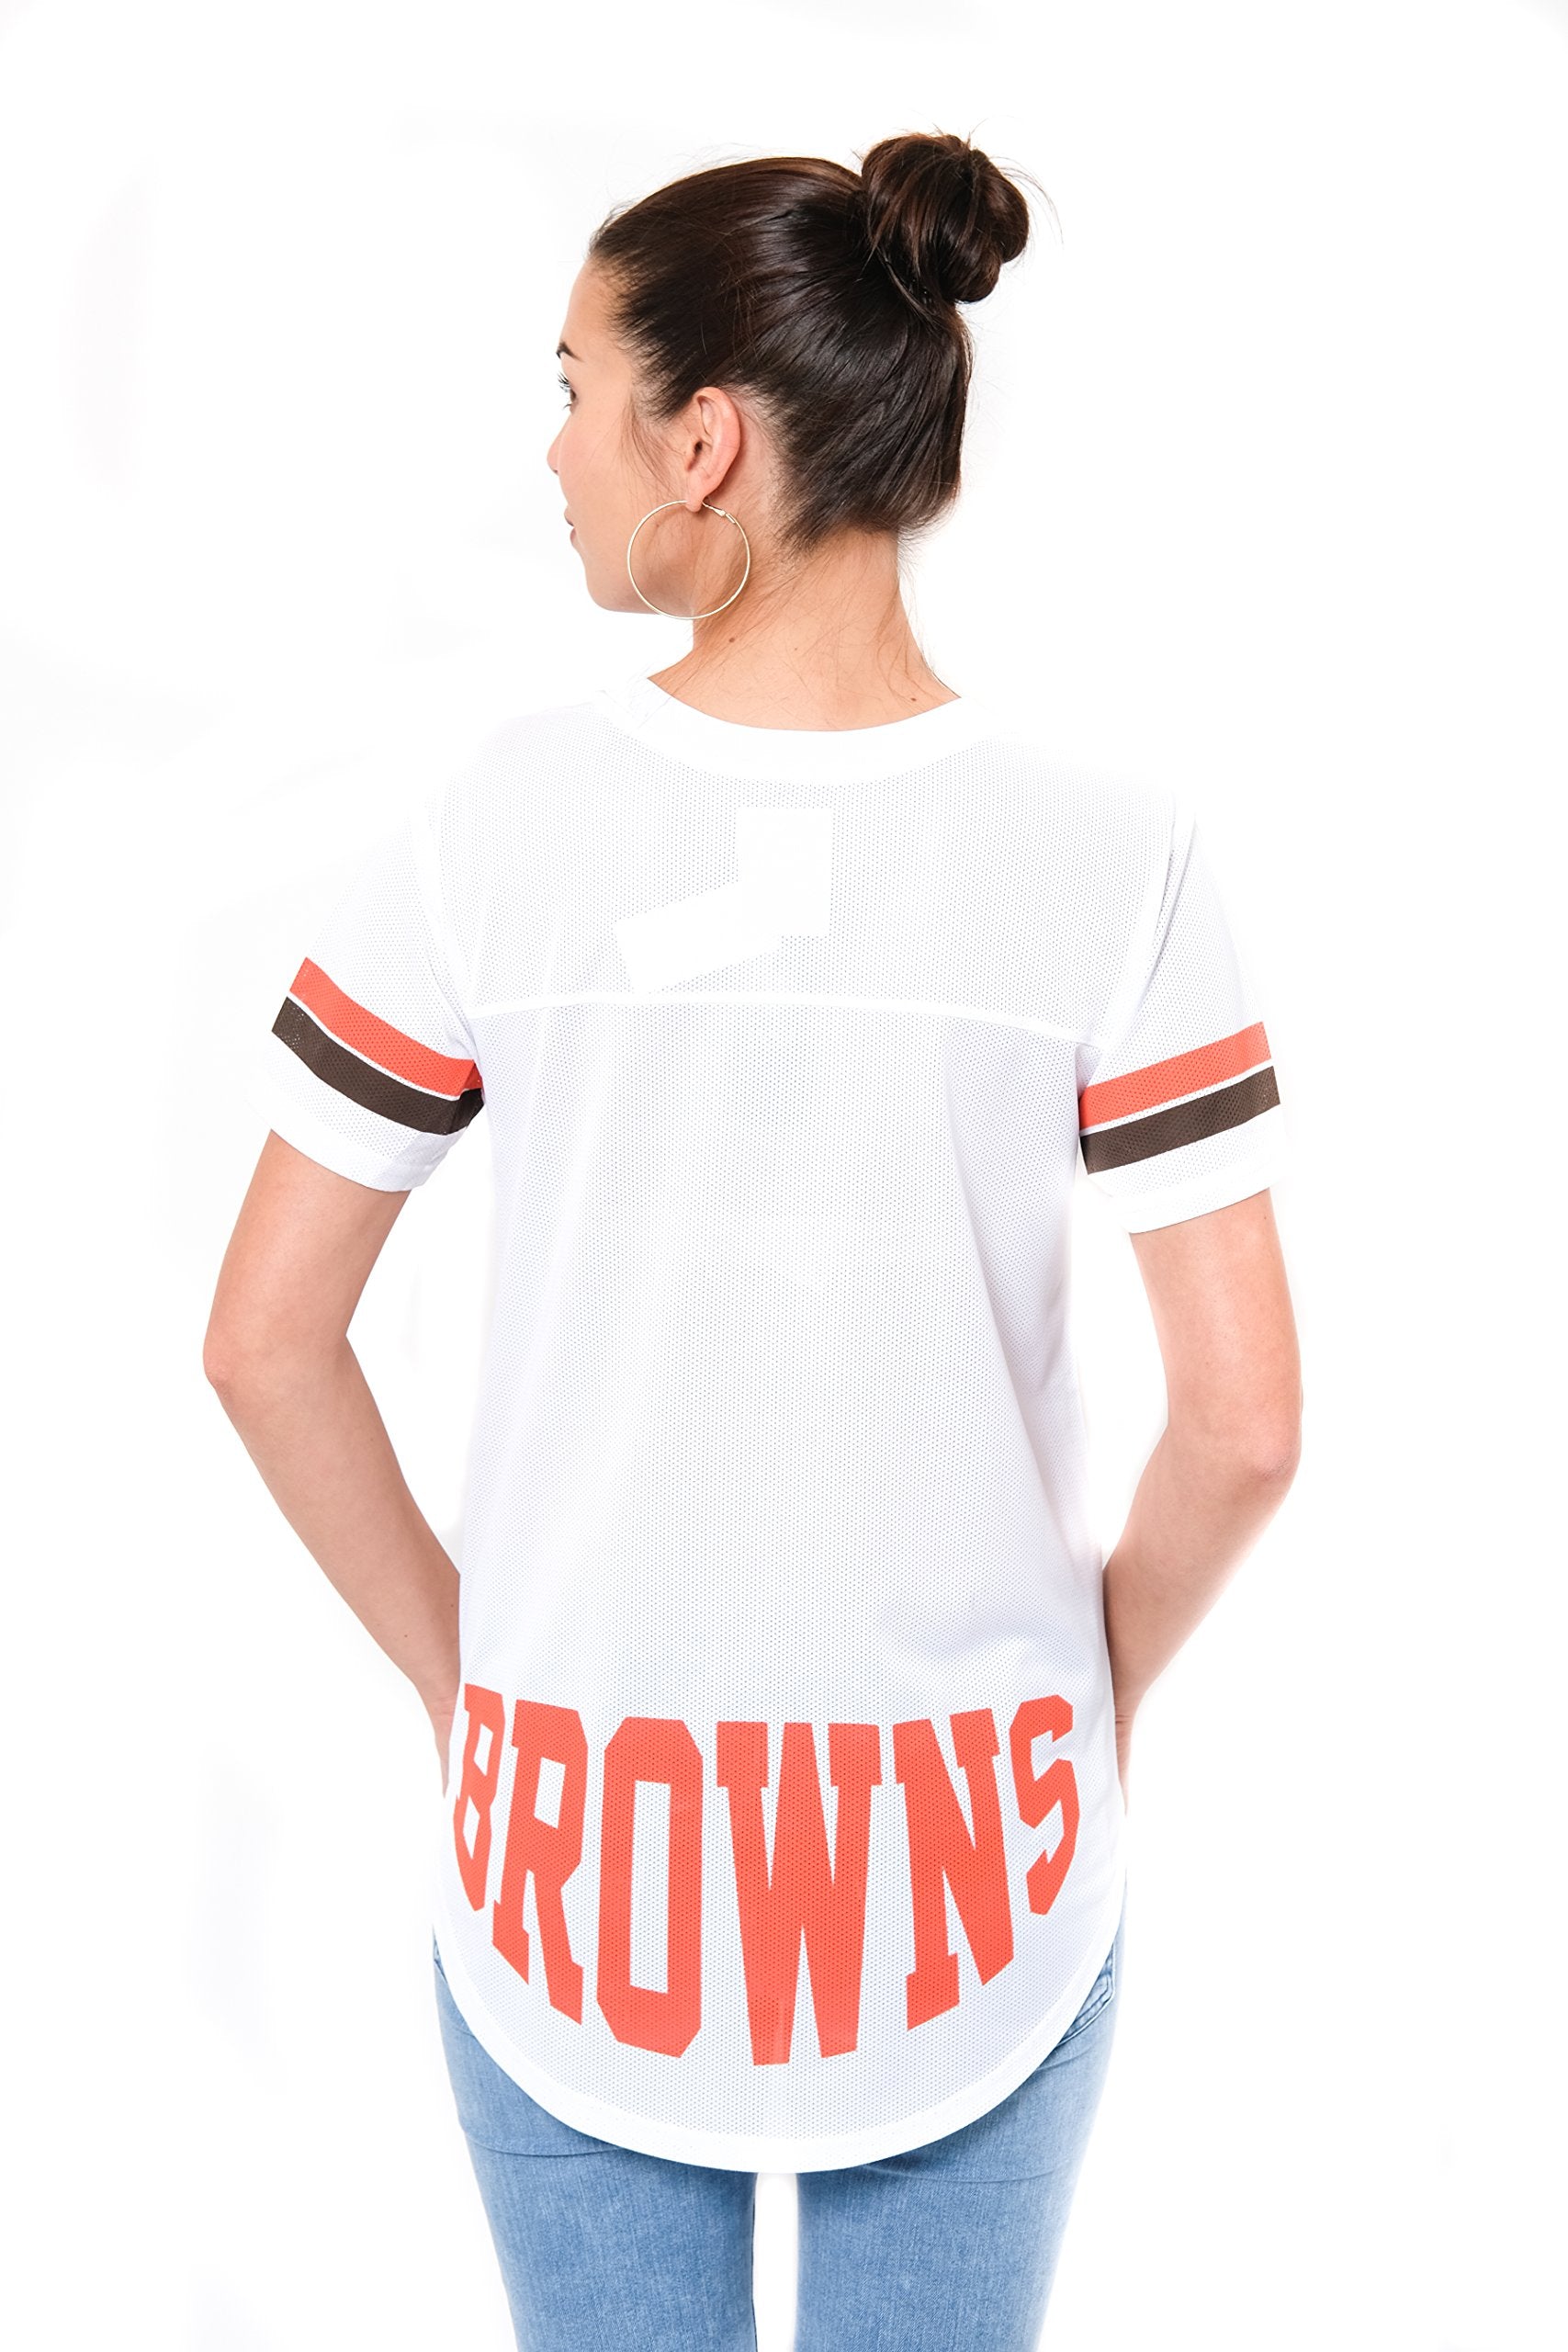 Ultra Game NFL Cleveland Browns Womens Soft Mesh Jersey Varsity Tee Shirt|Cleveland Browns